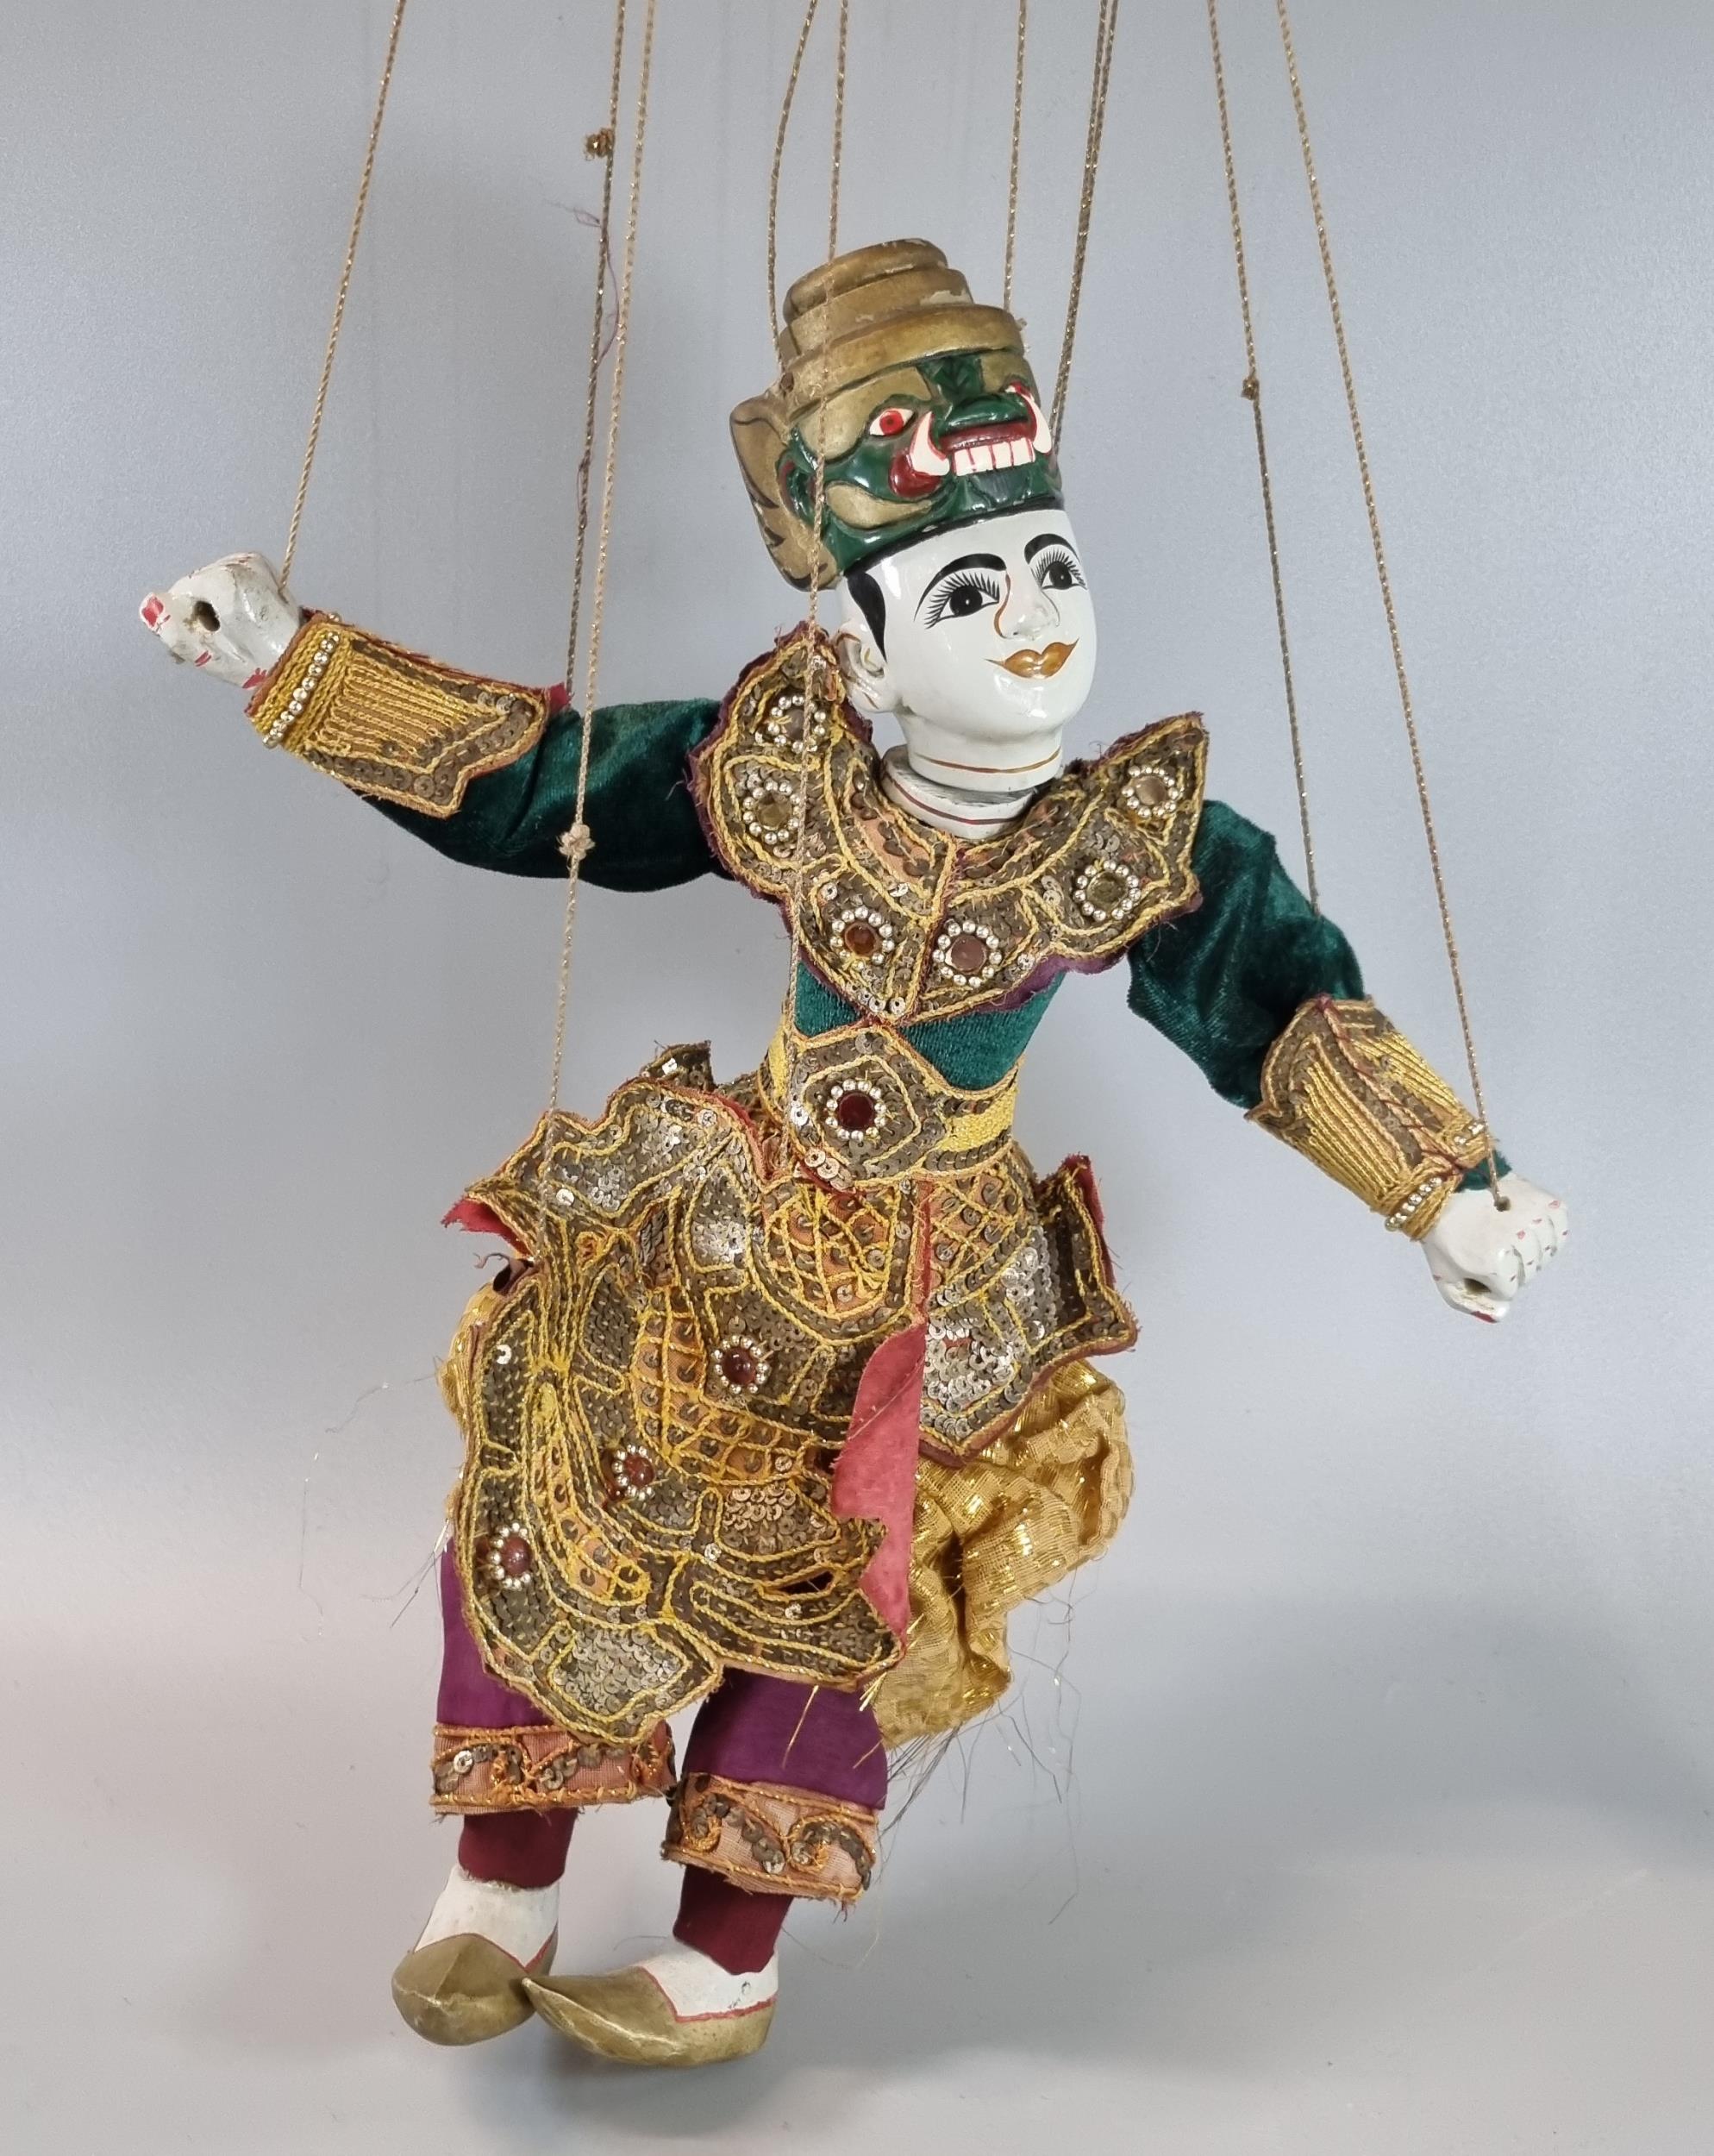 Thai or Indian Marionette fabric and wooden puppet with traditional ornament embroidered outfit. (